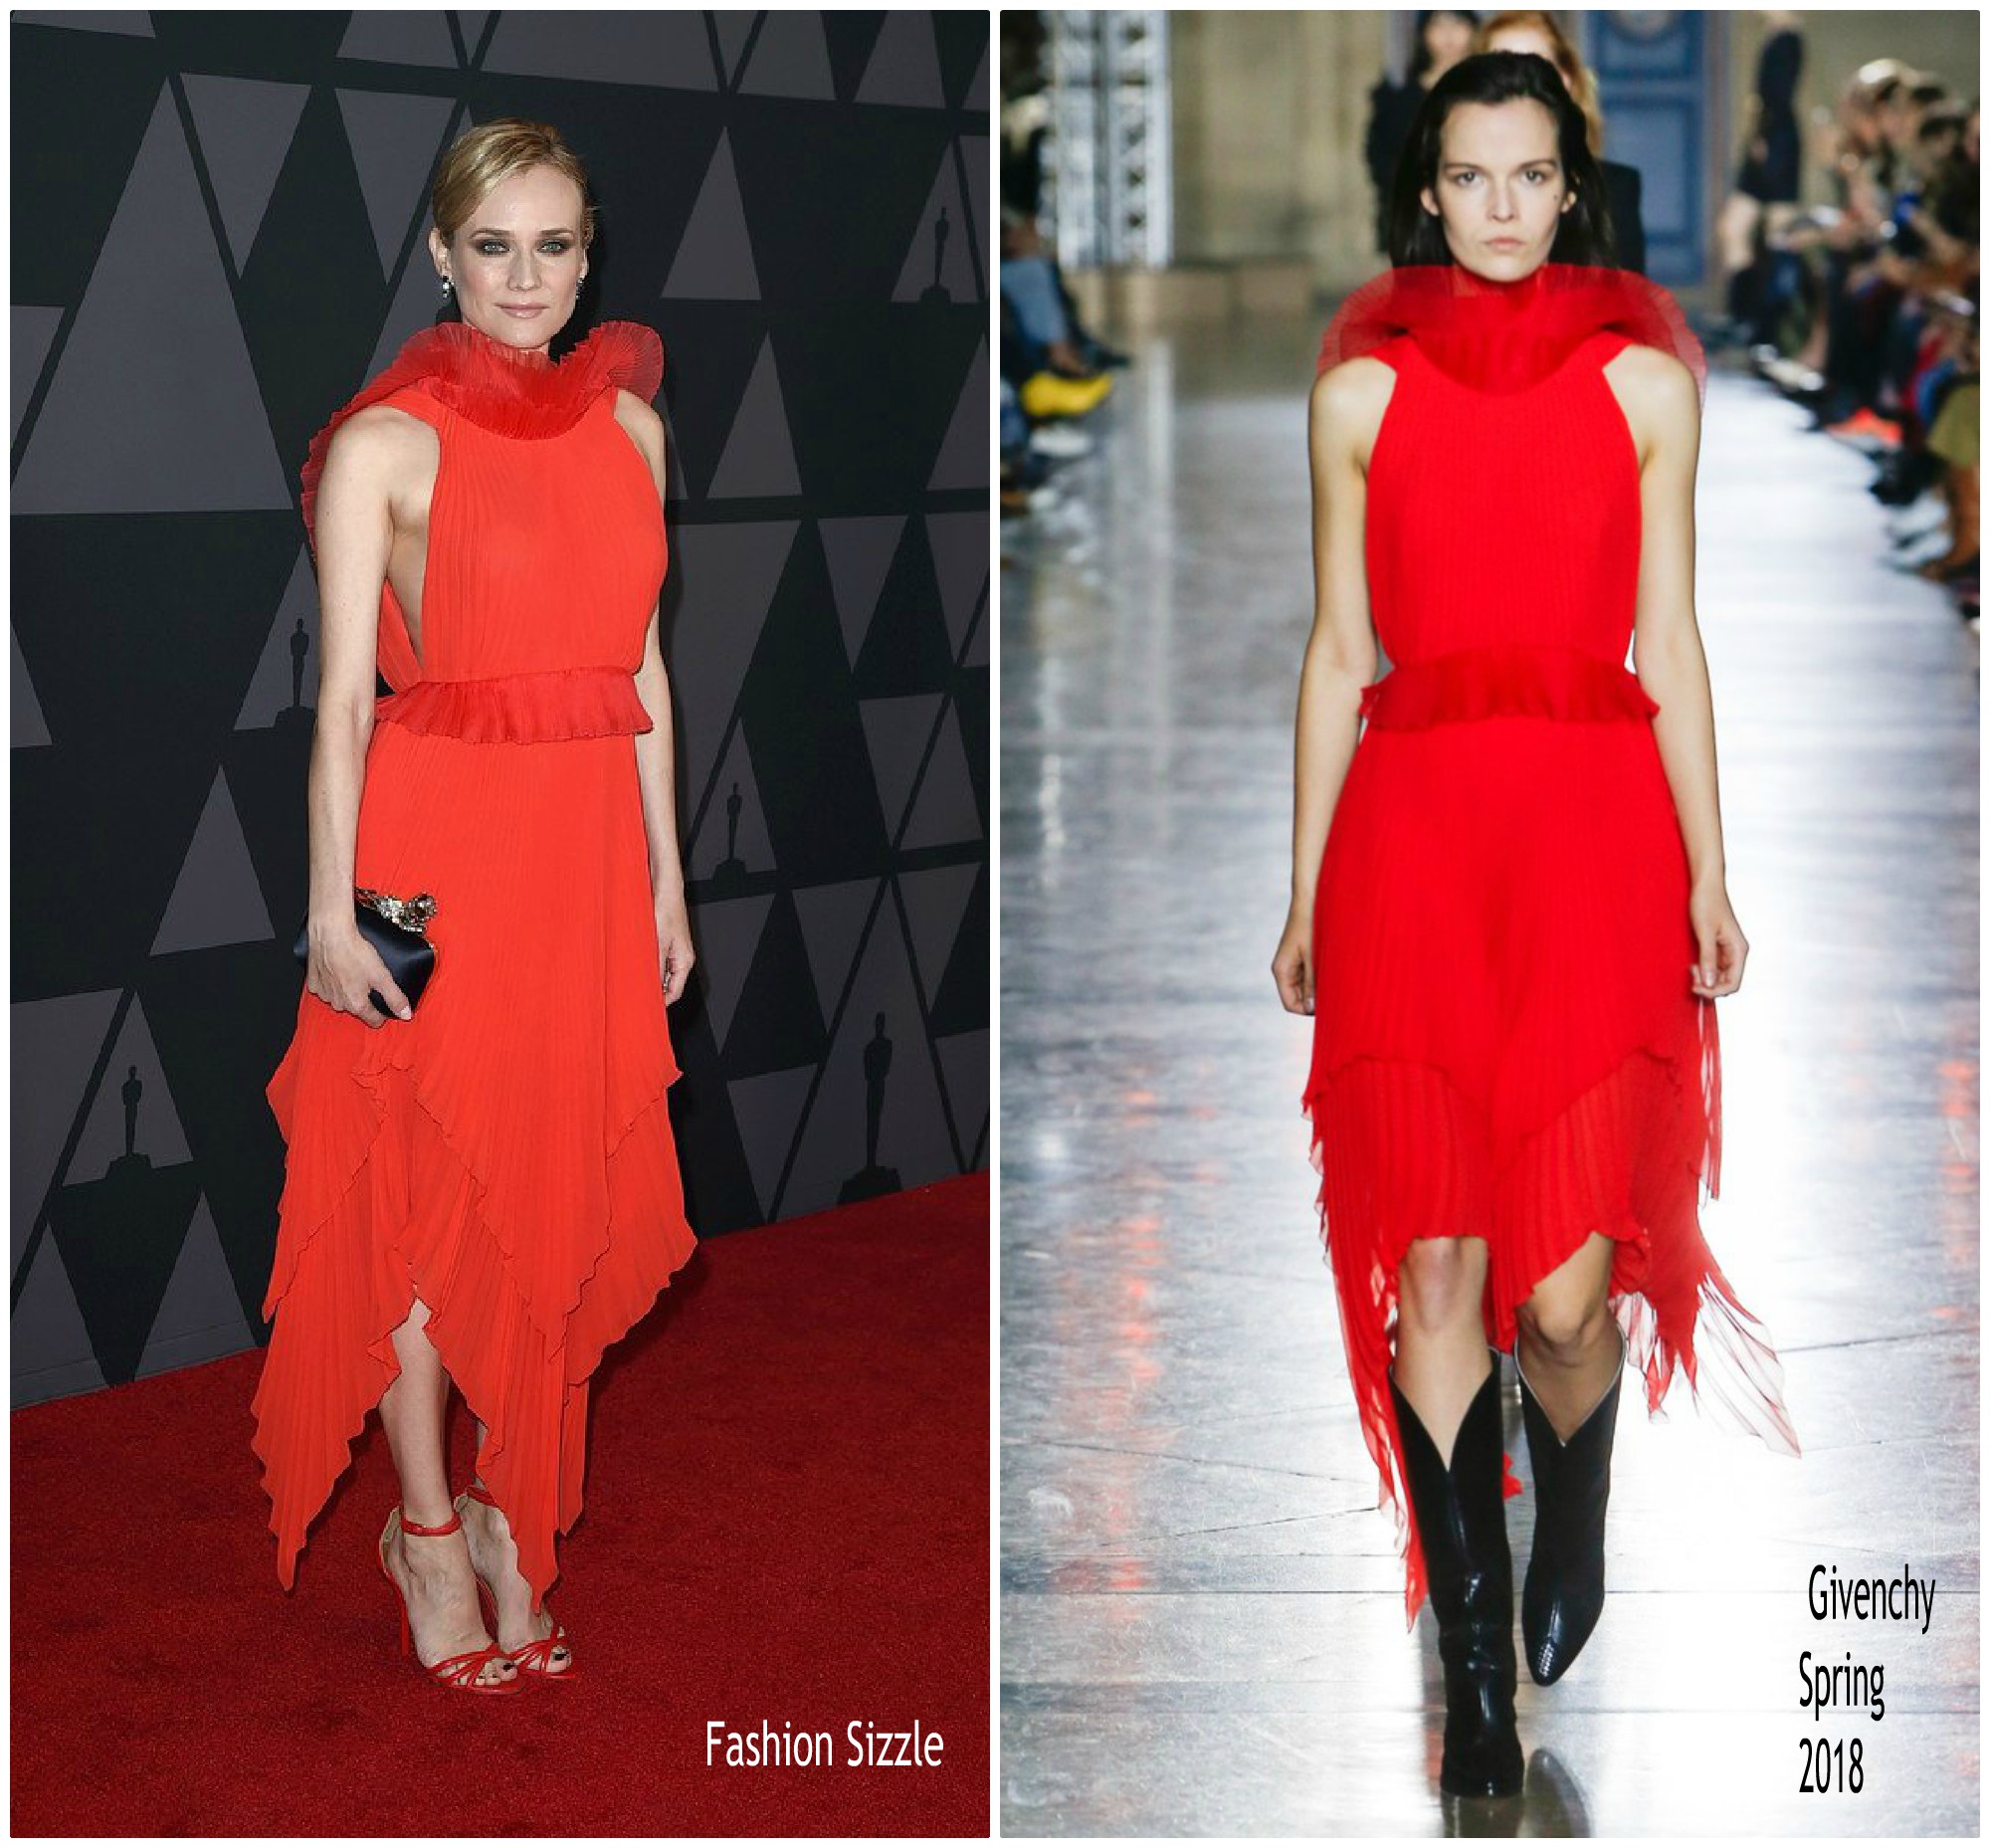 diane-kruger-in-givenchy-academy-of-motion-picture-arts-sciences-art-sciences-9th-anual-governors-awards